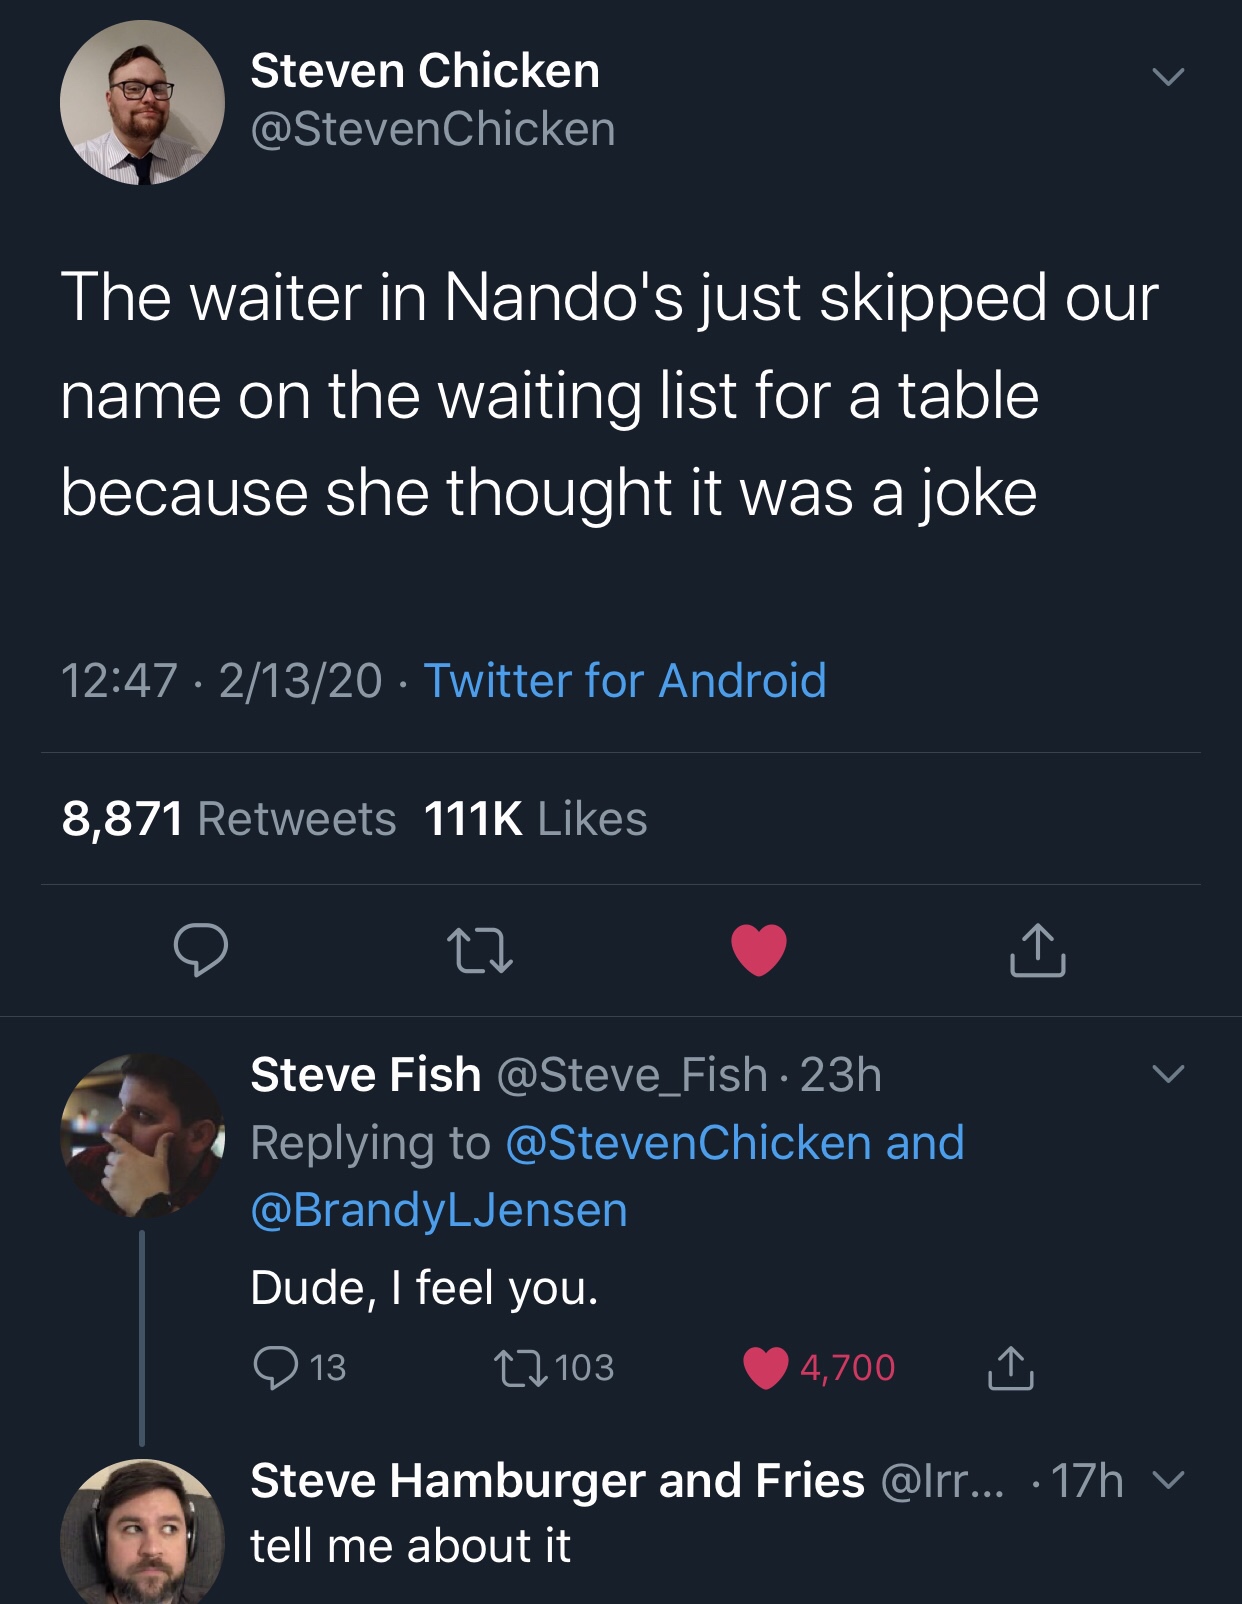 screenshot - Steven Chicken The waiter in Nando's just skipped our name on the waiting list for a table because she thought it was a joke 21320 Twitter for Android 8,871 e Cd v Steve Fish 23h and .Jensen Dude, I feel you. 913 27103 4,700 1 Steve Hamburger